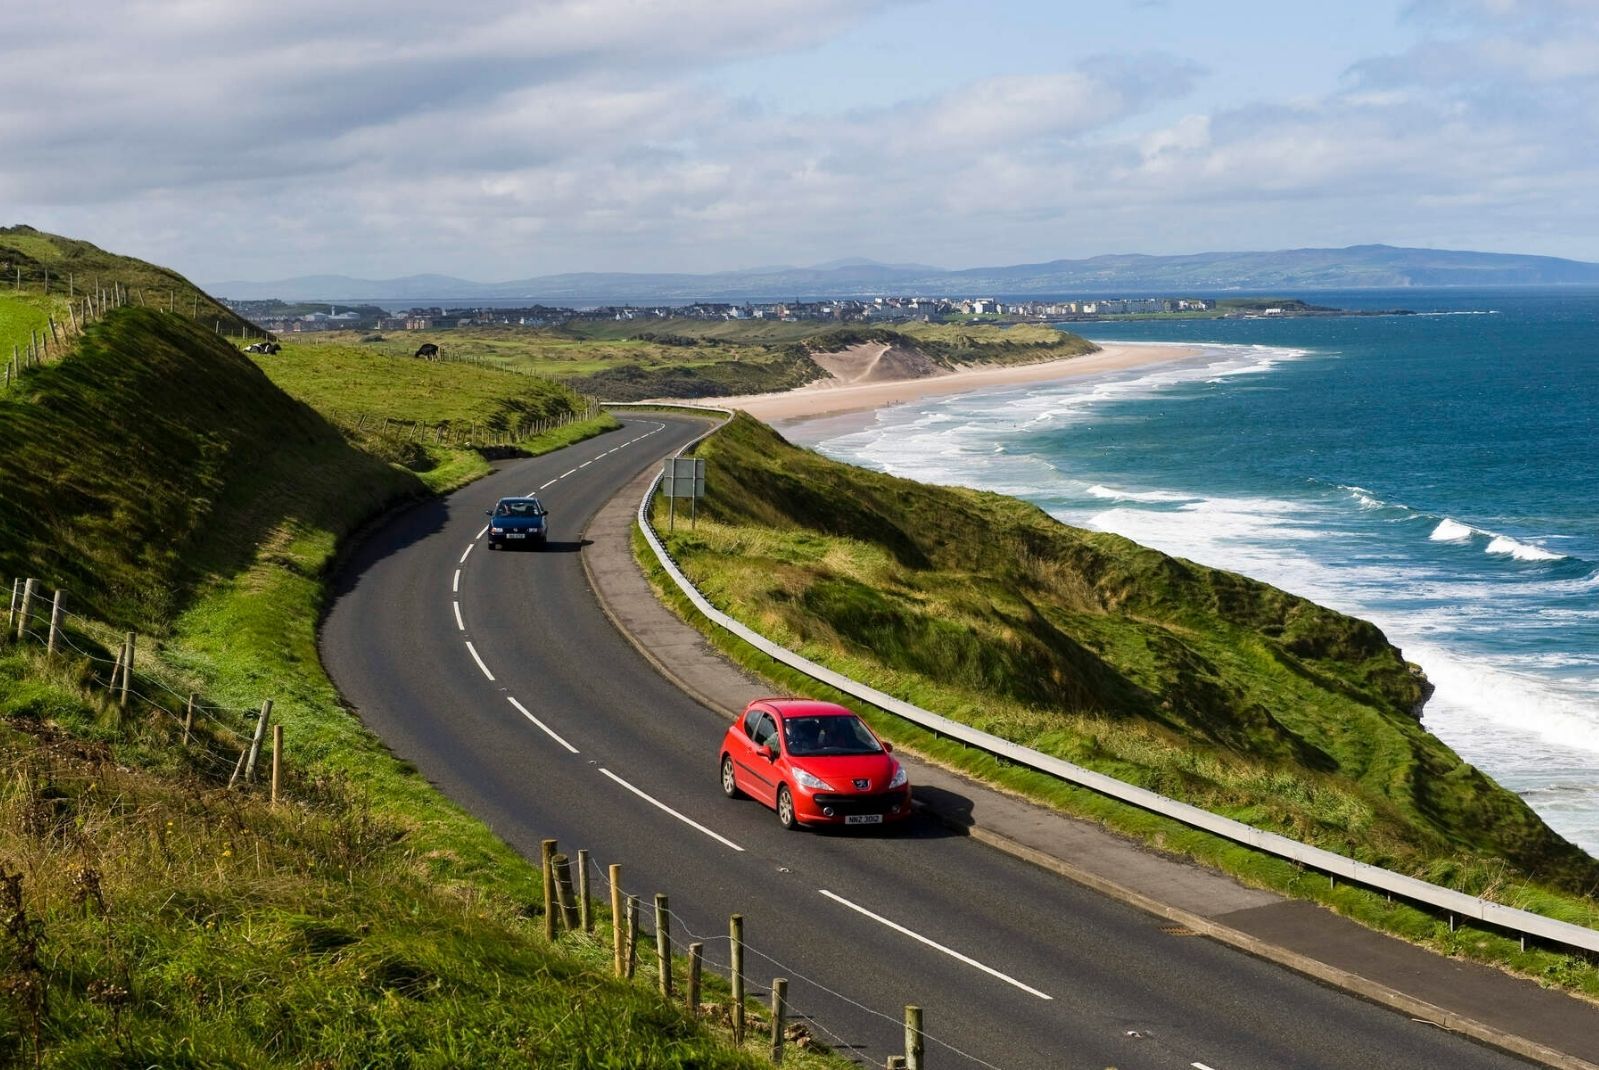 Driving the causeway coastal route